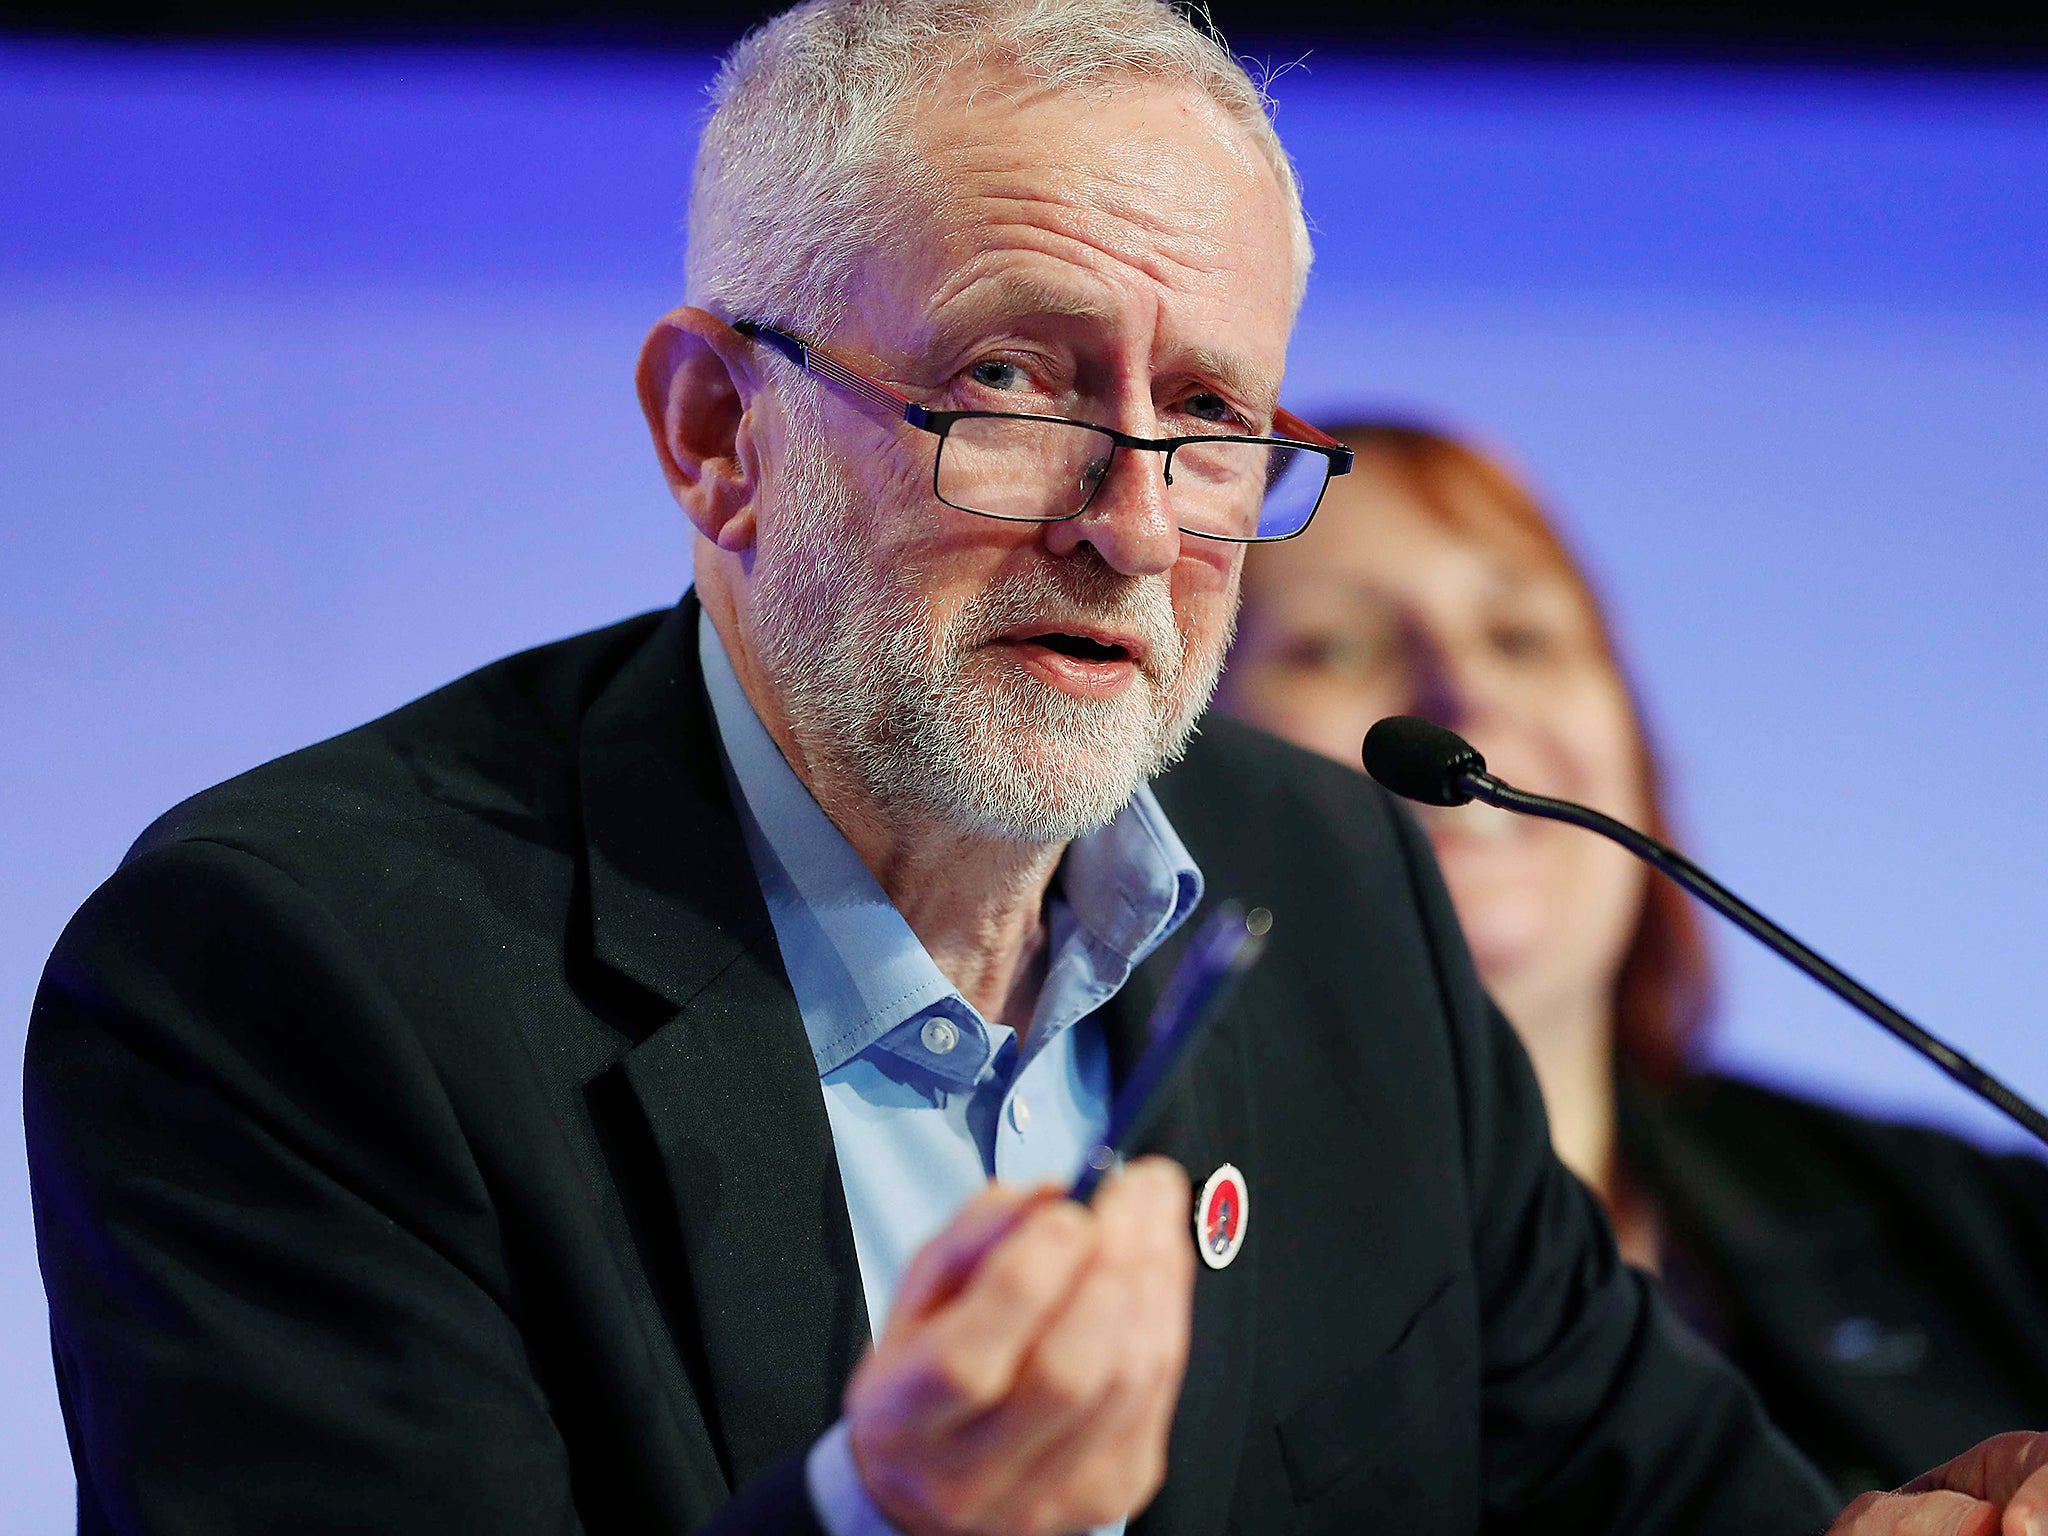 Labour has so far ruled out a pact with the Greens and insists it will ‘fight for every seat’, even those in which it has no chance of winning and where standing may help the Tories